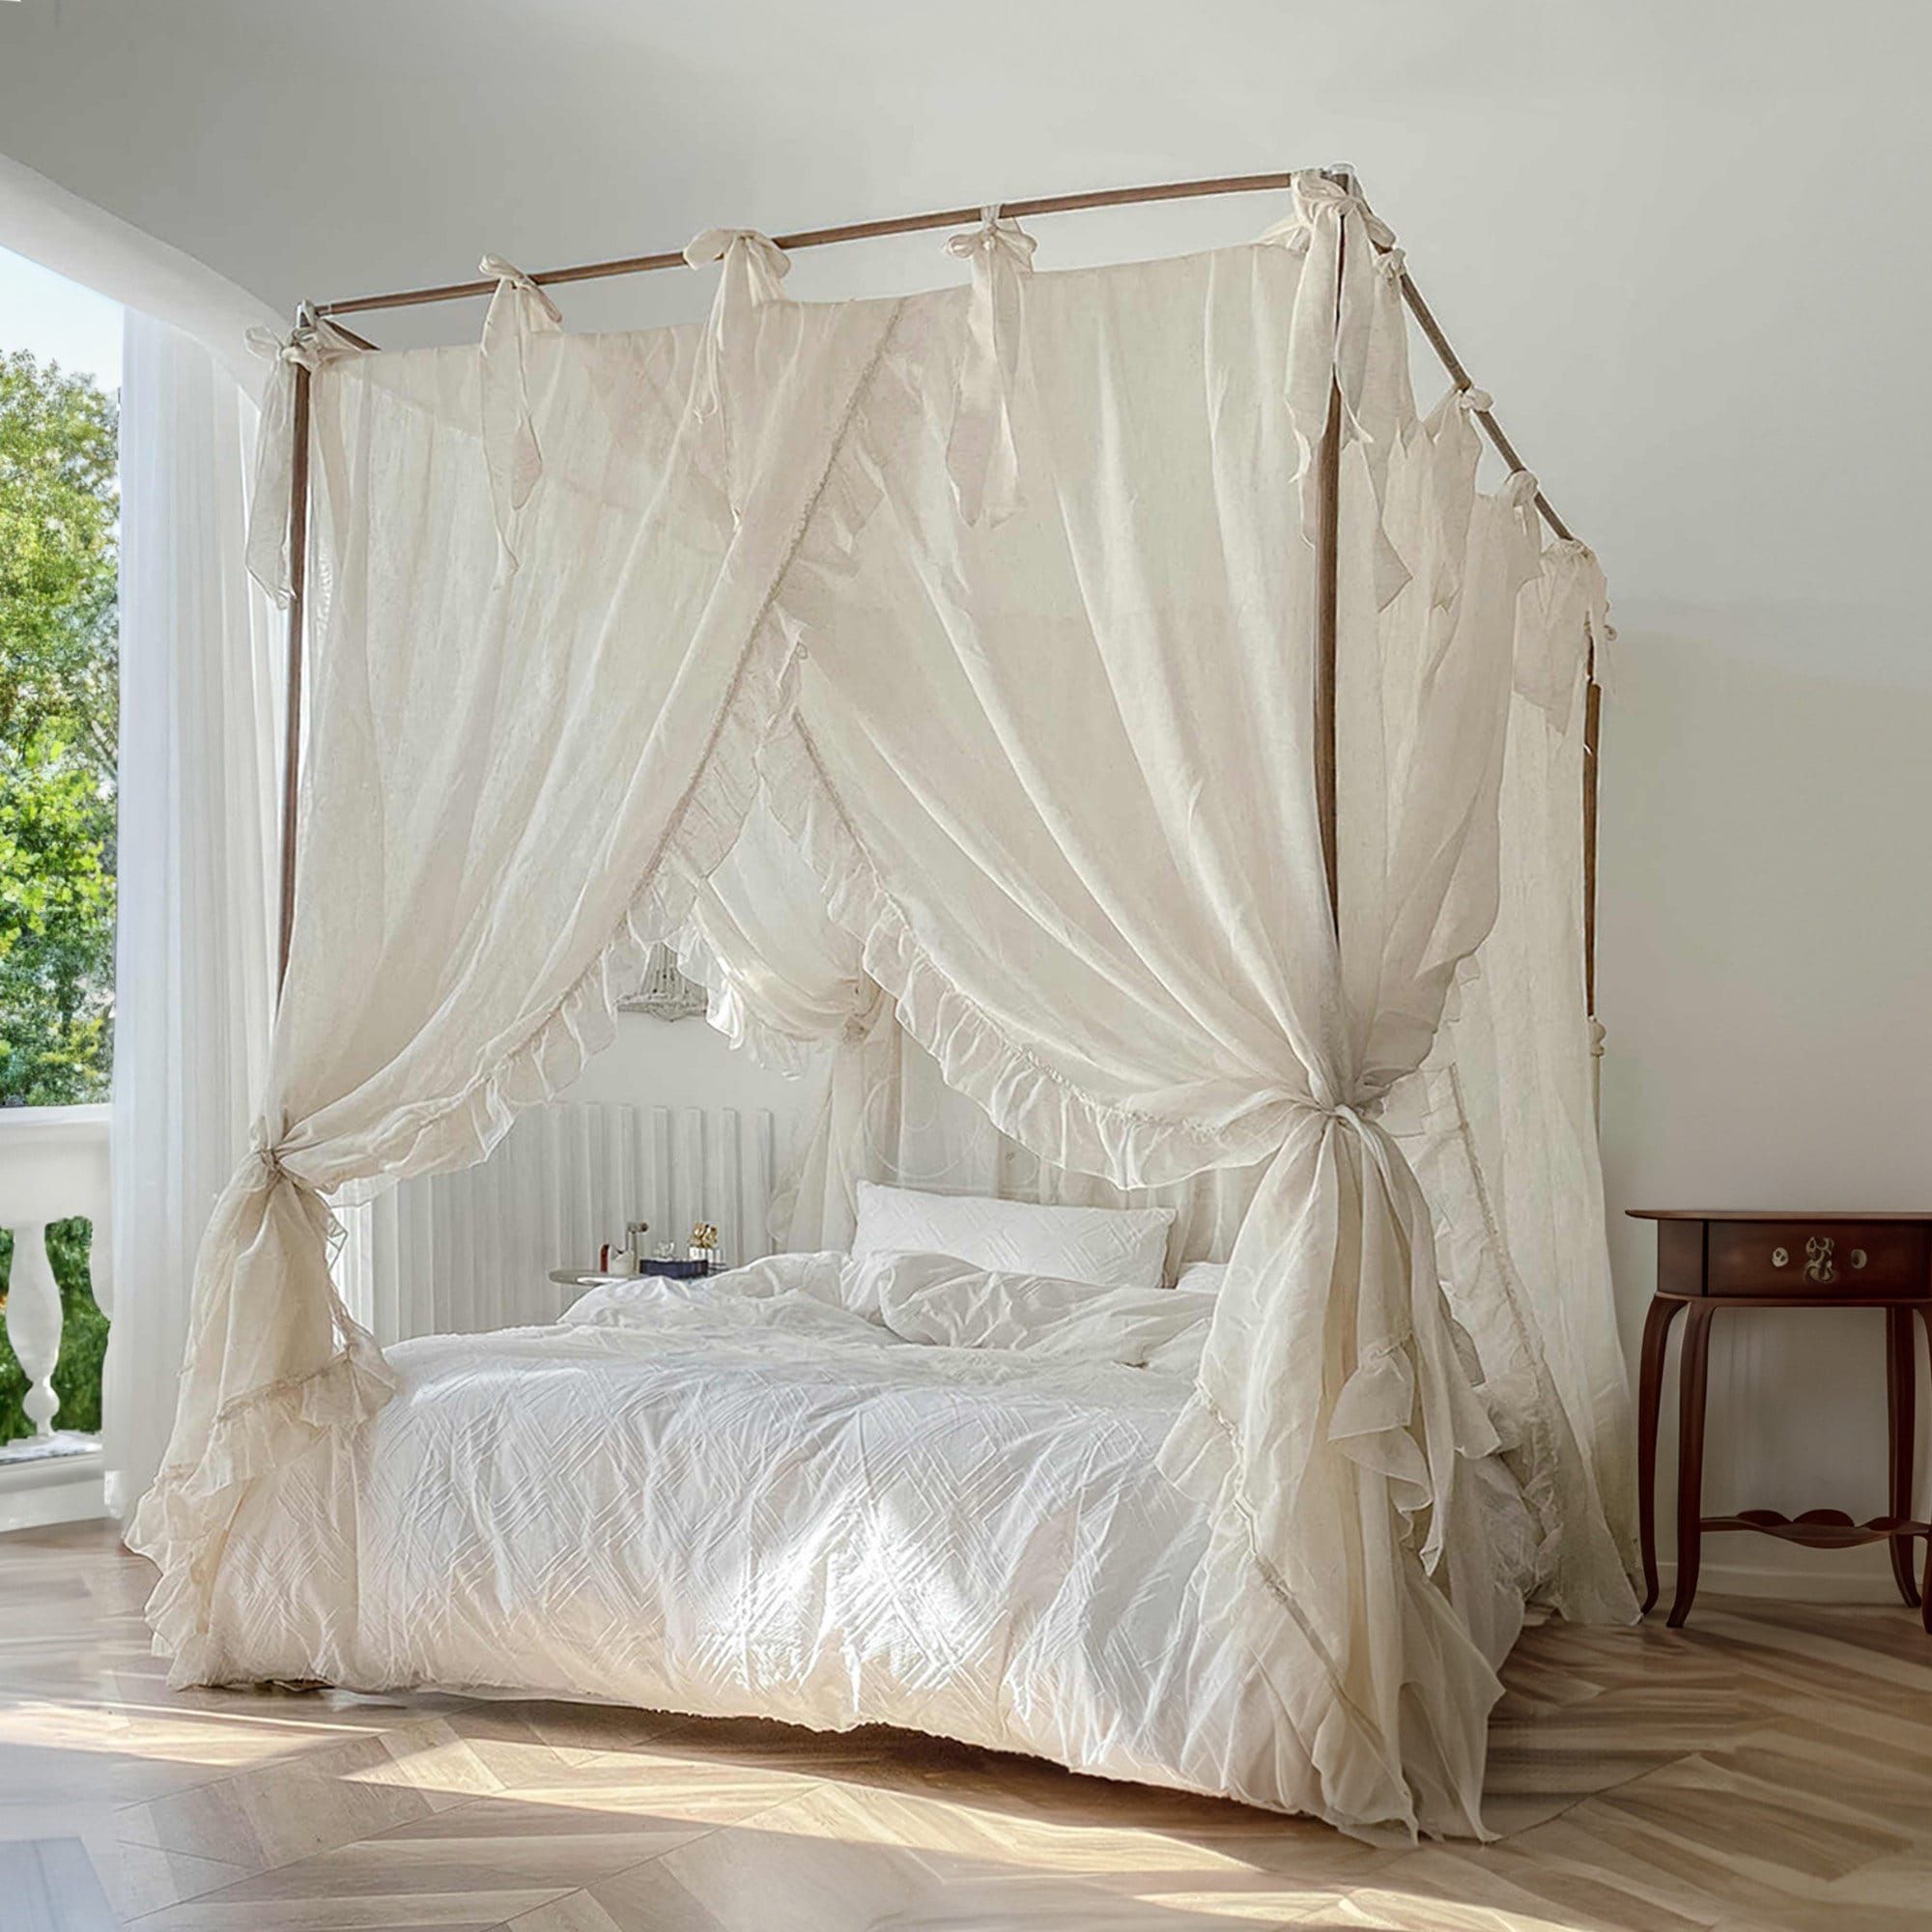 Luxurious Sleep: The Timeless Elegance of Canopy Beds